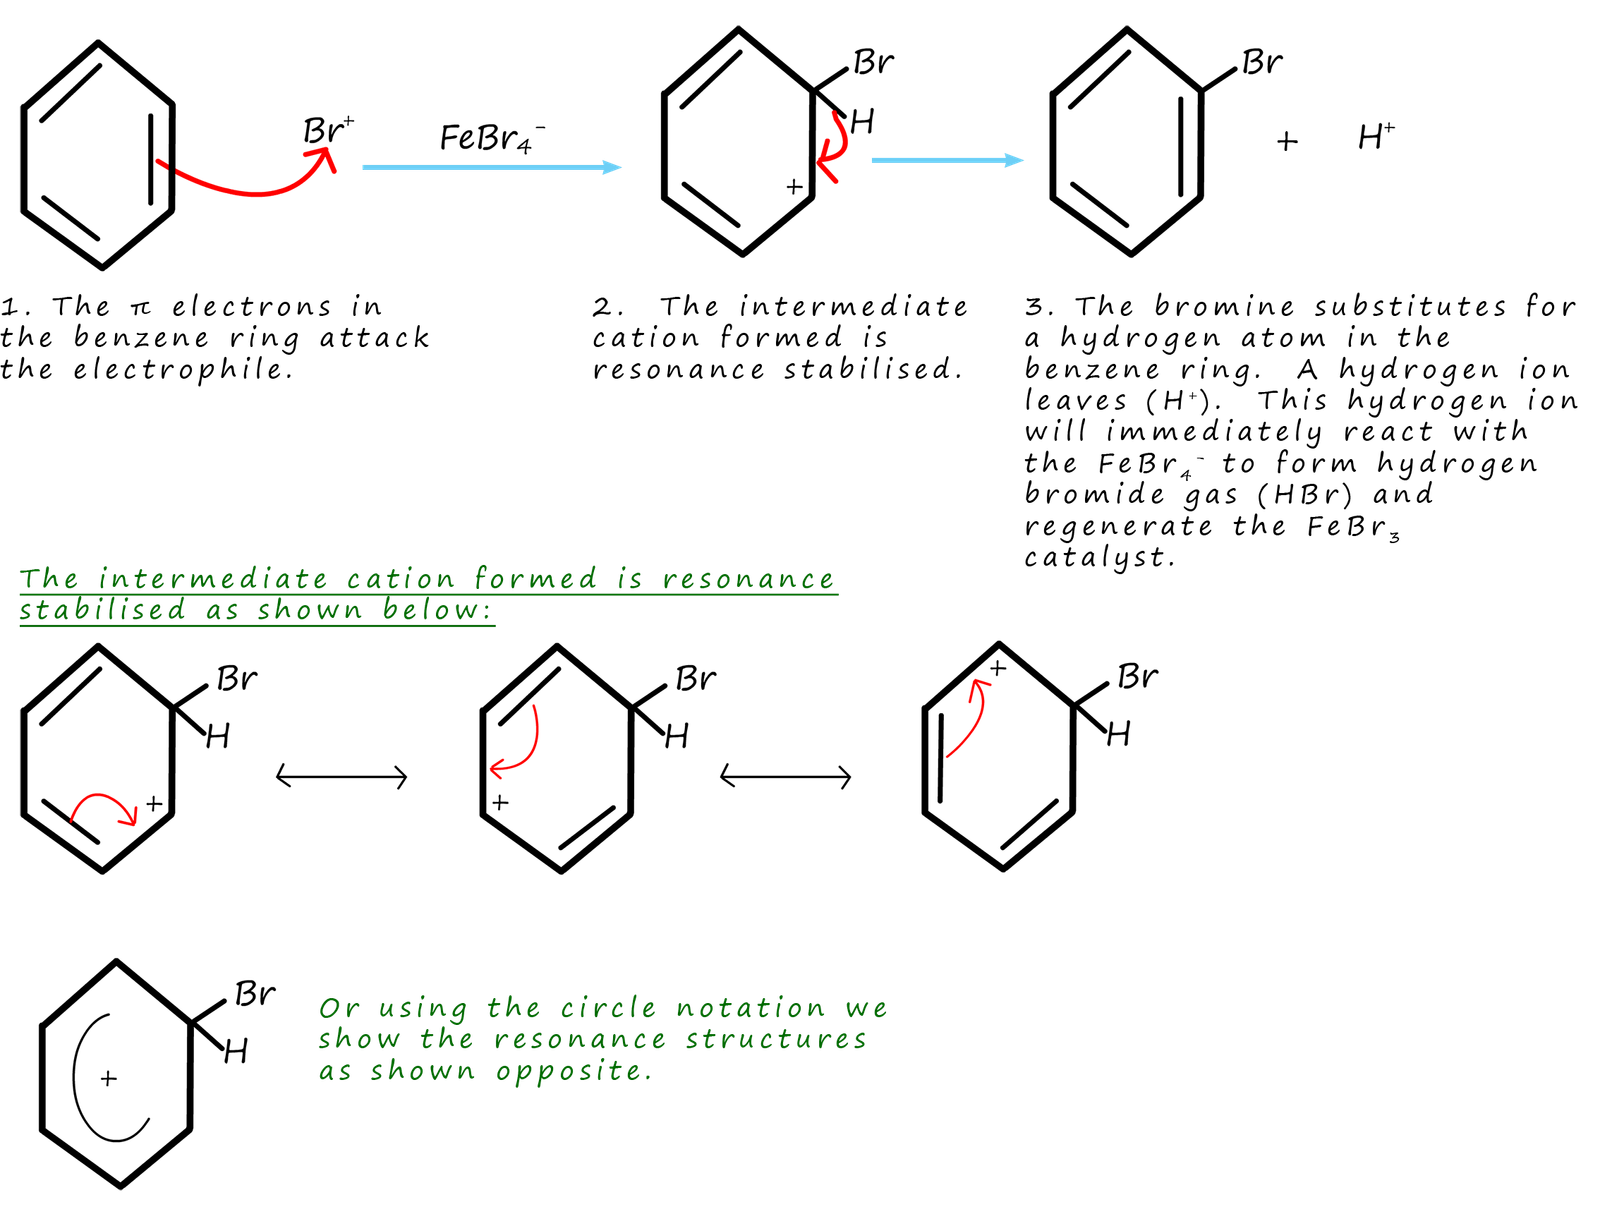 mechanism resonance hydrid structures for the 
bromination of benzene